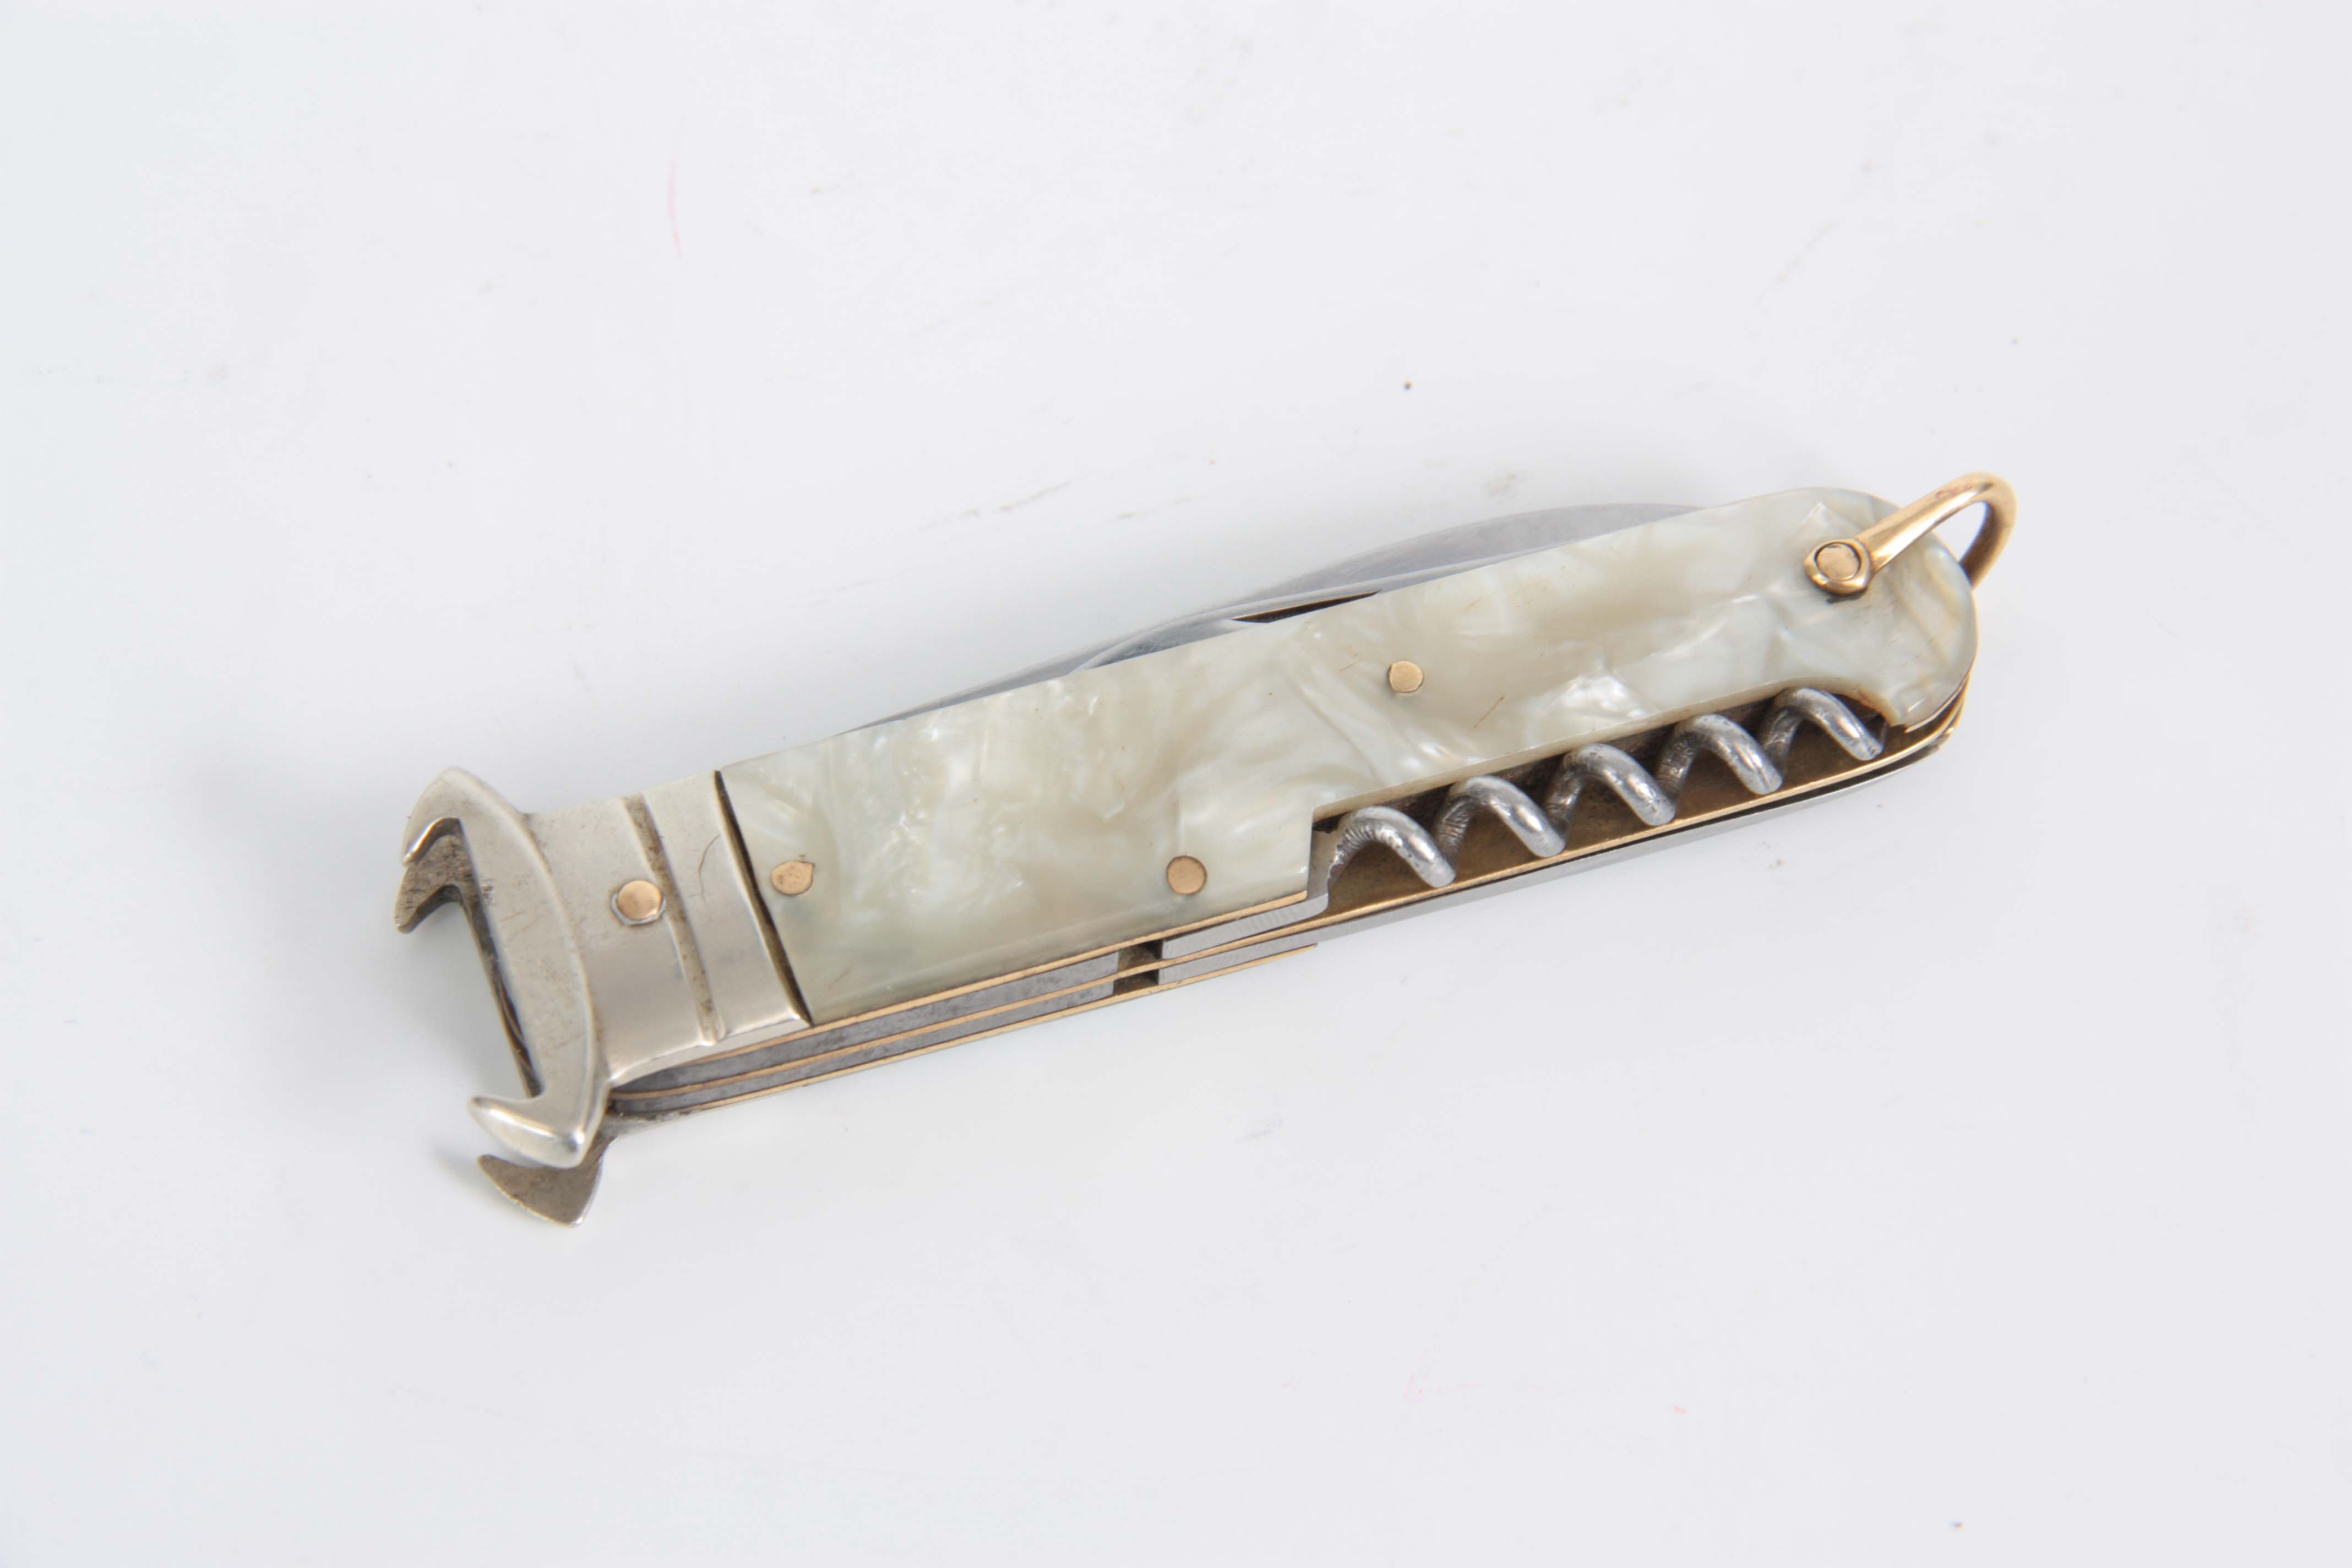 A VINTAGE SPANISH GENTLEMANS MULTI-FUNCTION HUNTING KNIFE with simulated mother of pearl handle - Image 2 of 6